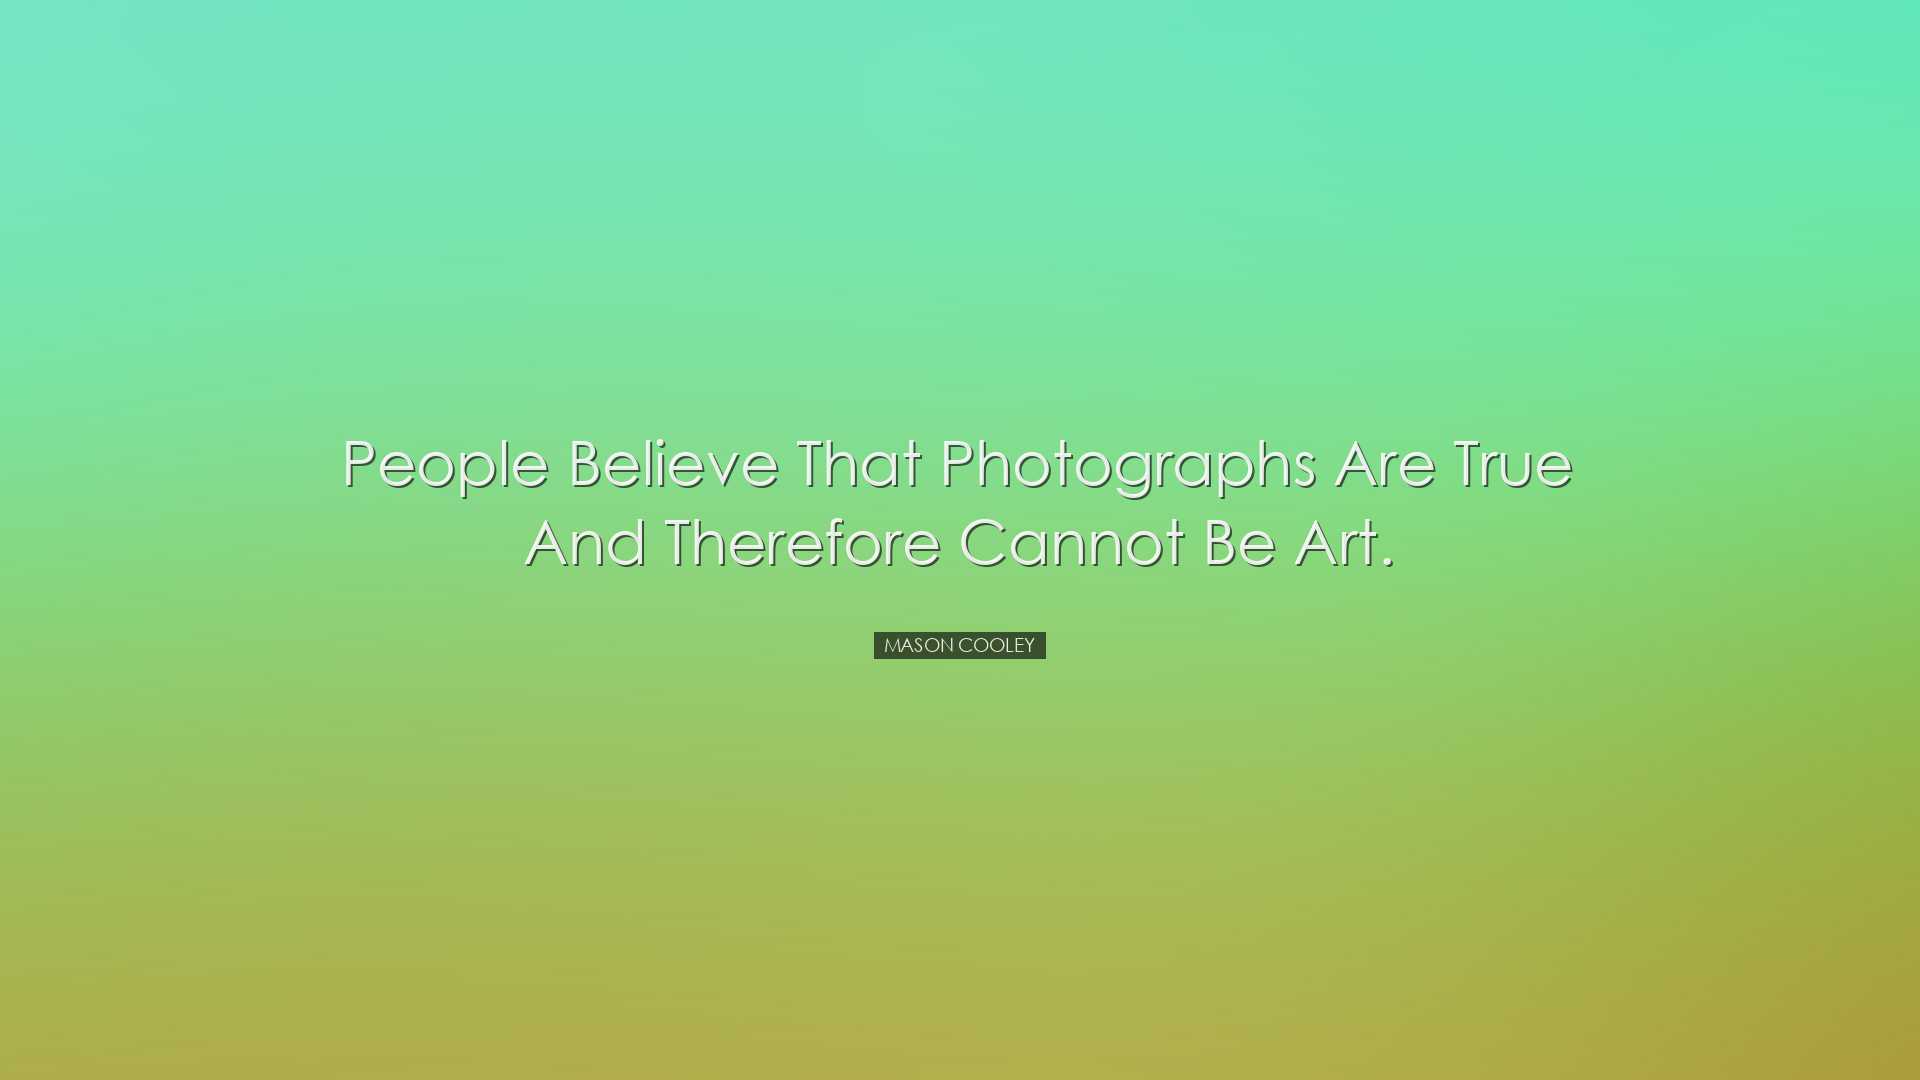 People believe that photographs are true and therefore cannot be a